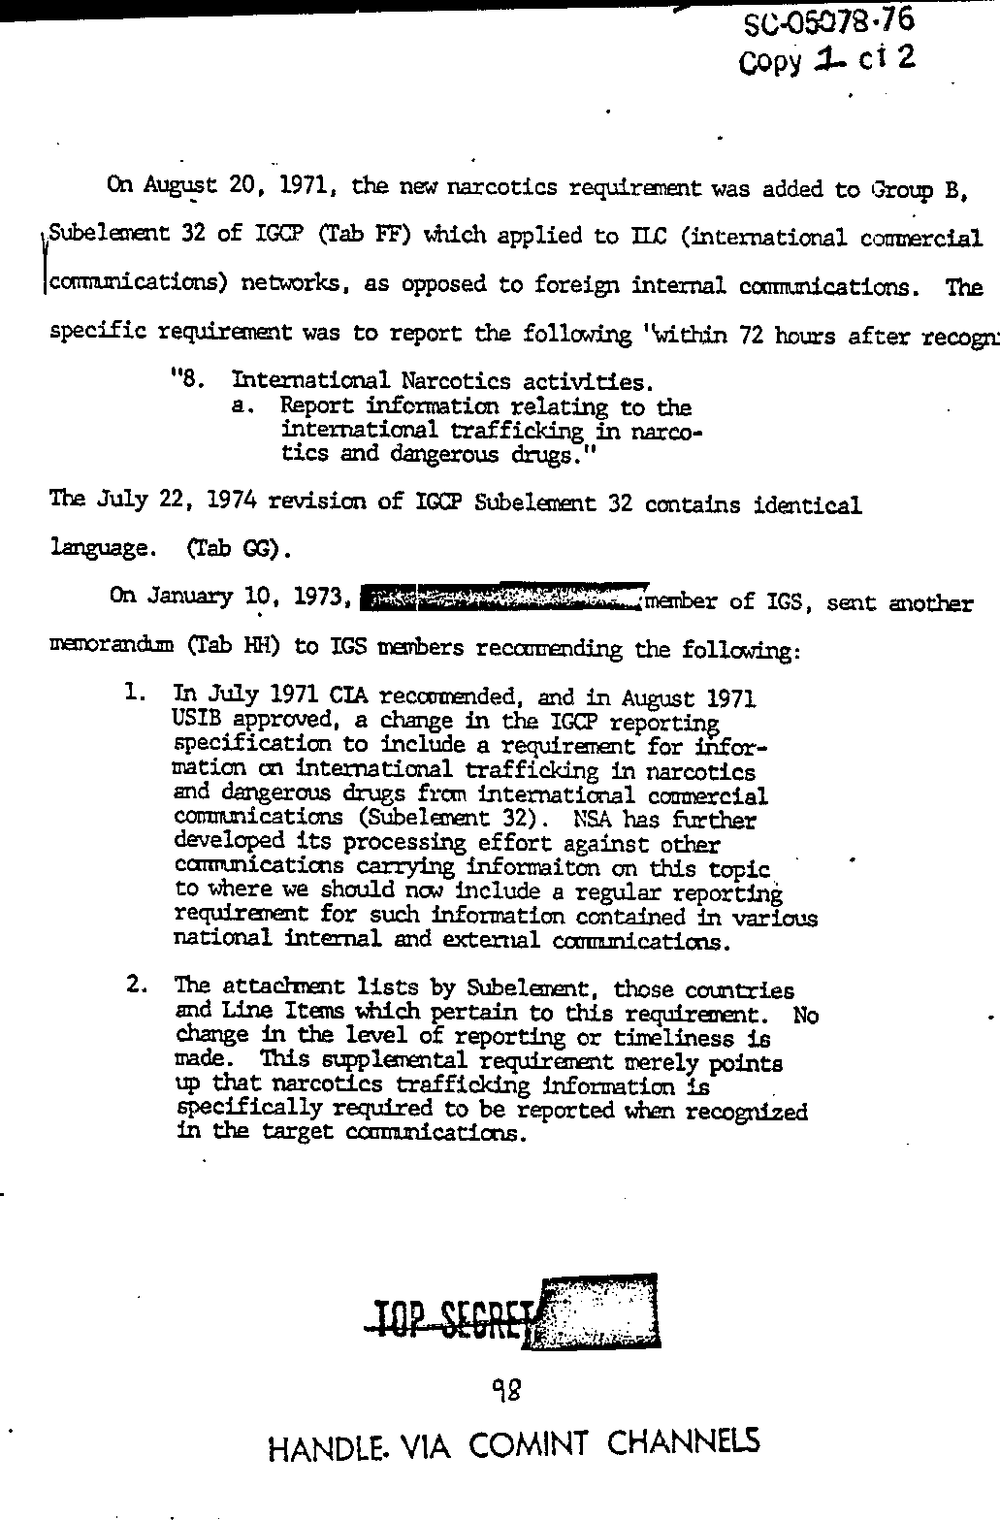 Page 106 from Report on Inquiry Into CIA Related Electronic Surveillance Activities